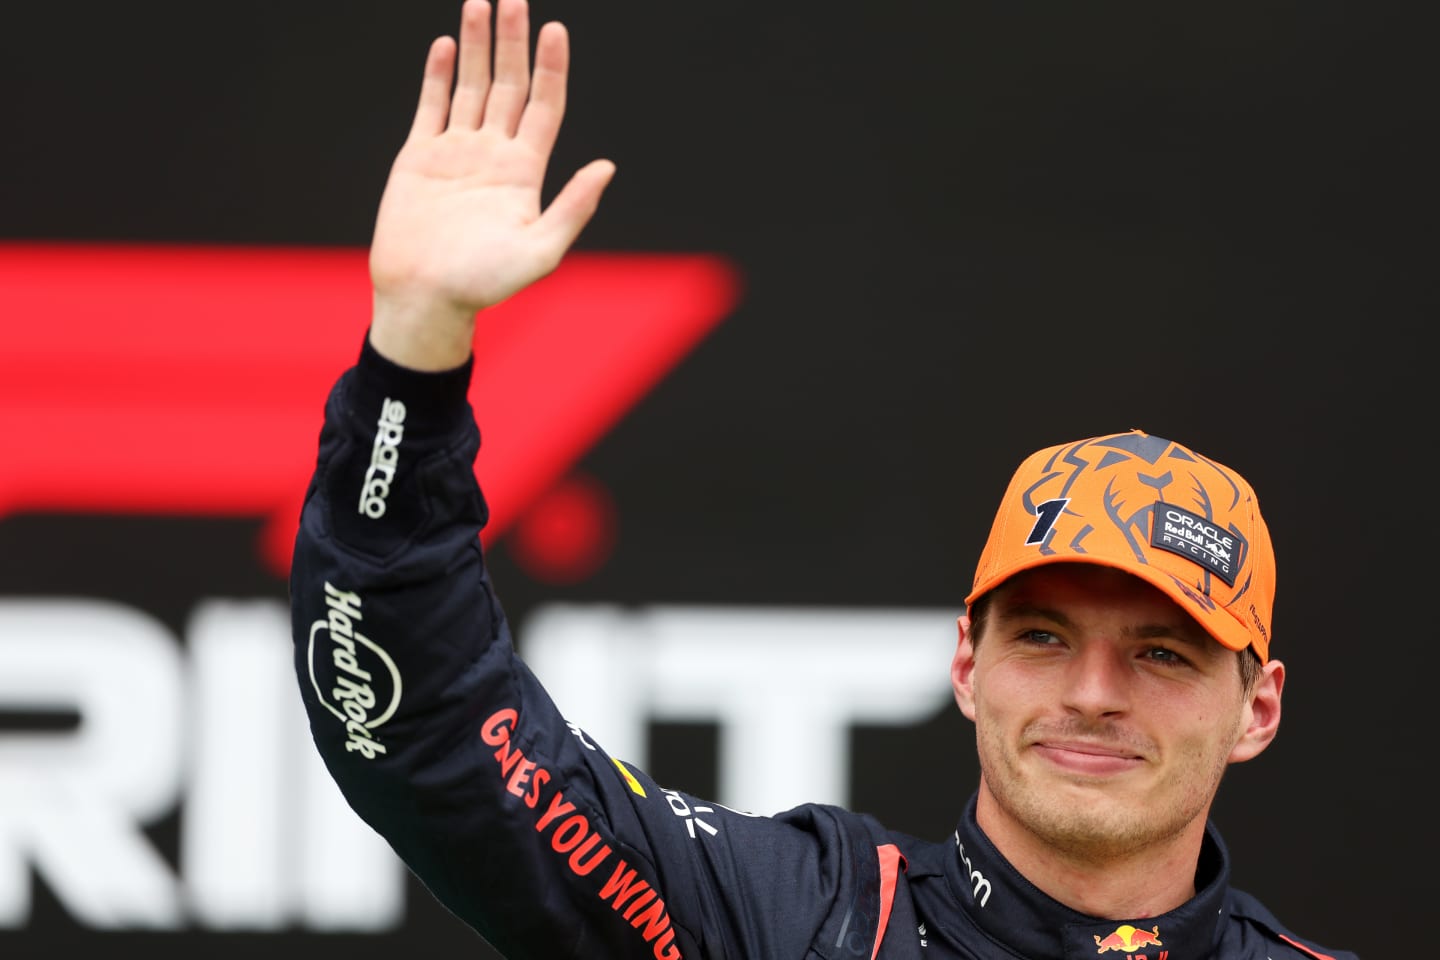 SPIELBERG, AUSTRIA - JULY 01: Pole position qualifier Max Verstappen of the Netherlands and Oracle